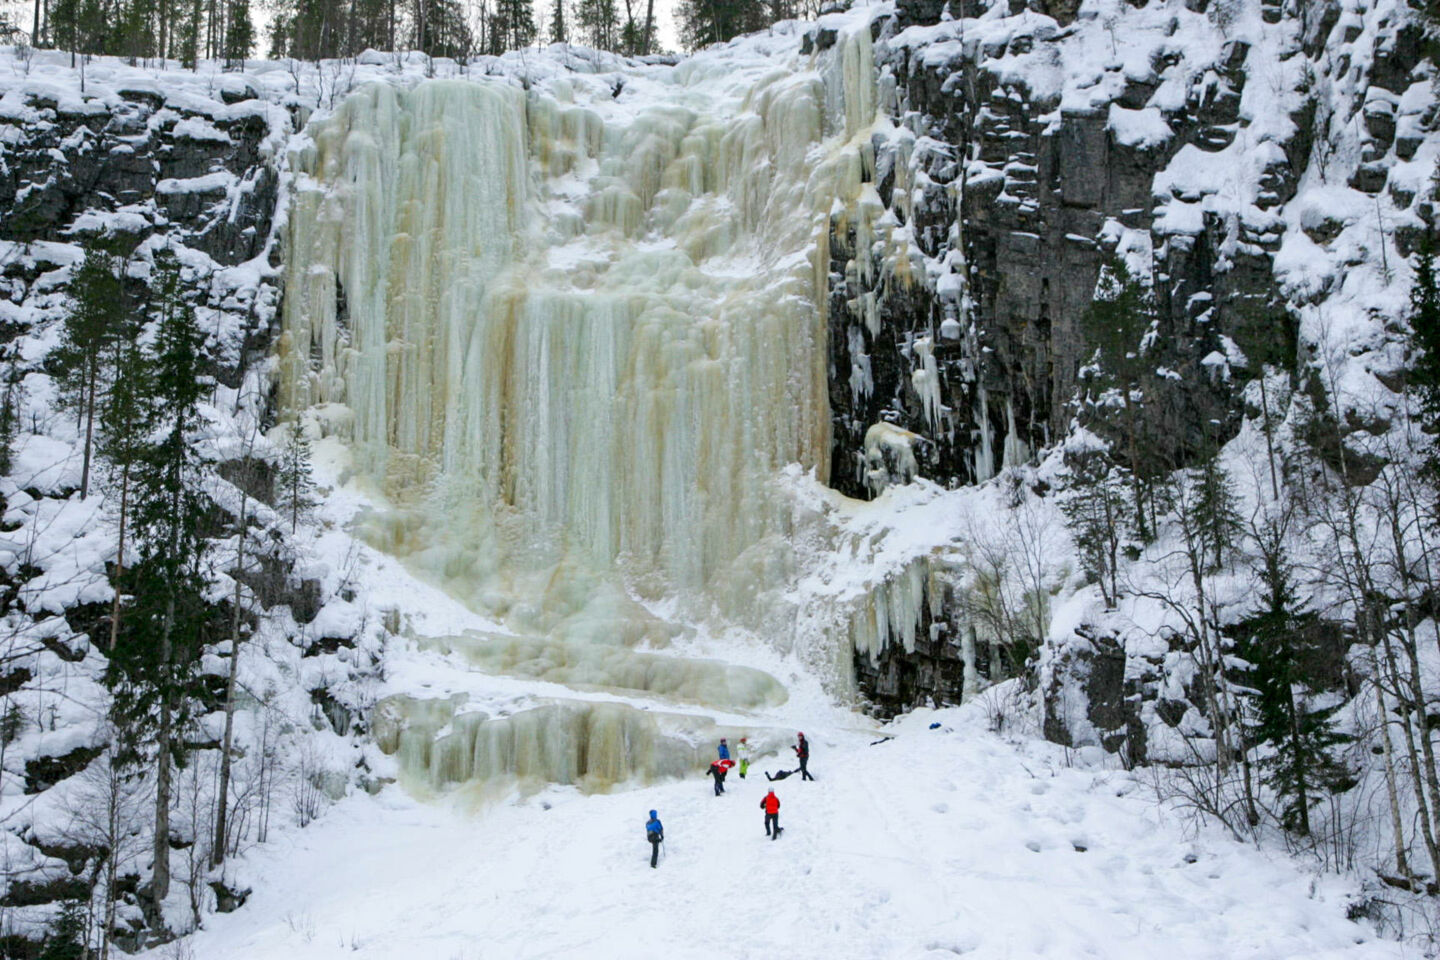 The frozen waterfall in Posio, a Finnish Lapland filming location